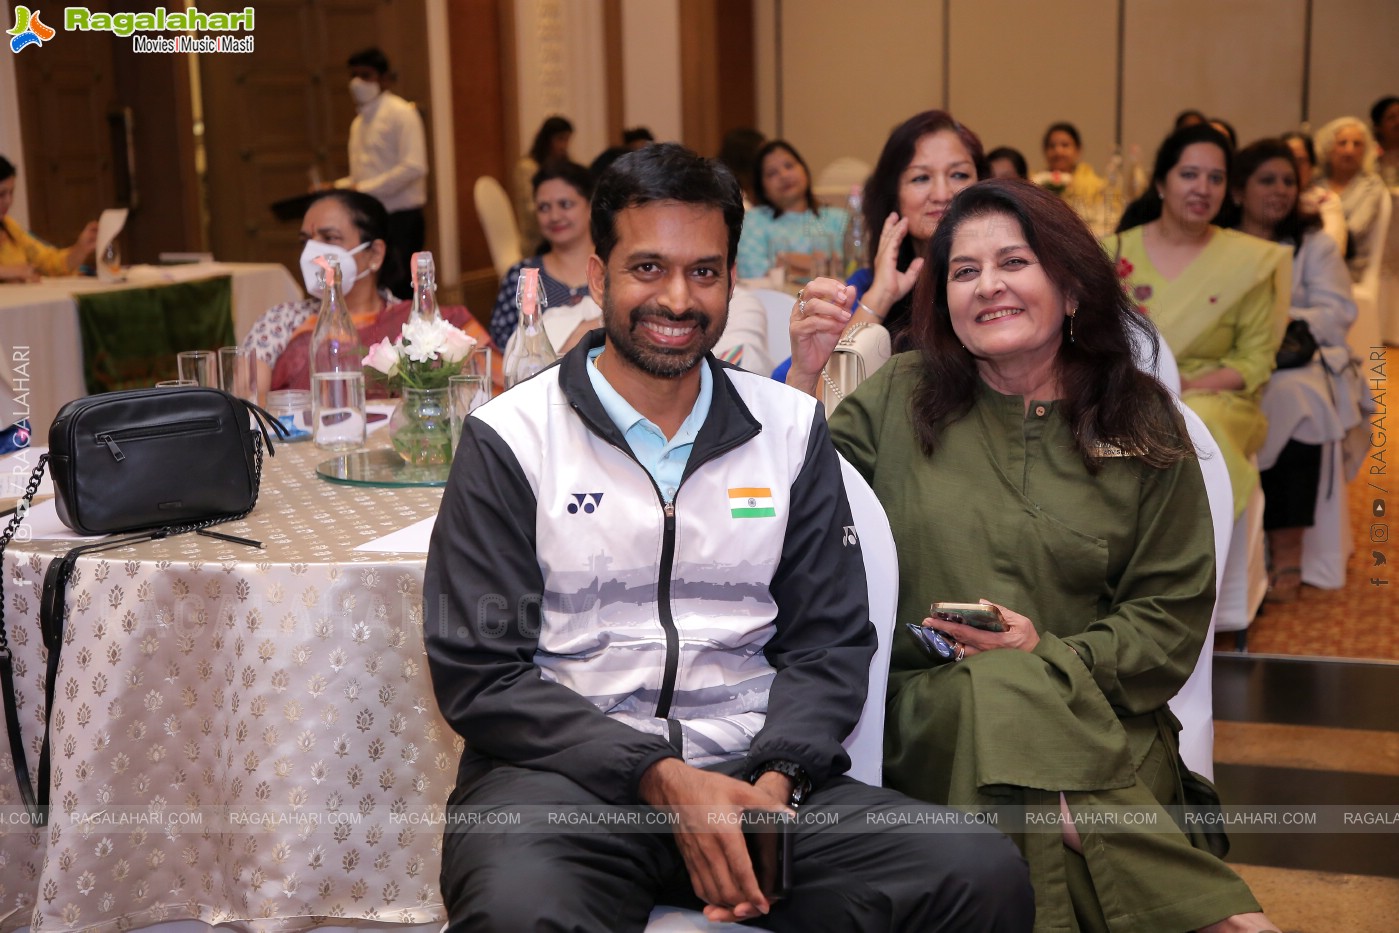 Sanskruti Hosts a Session with Renowned Badminton Player Gopichand Pullela